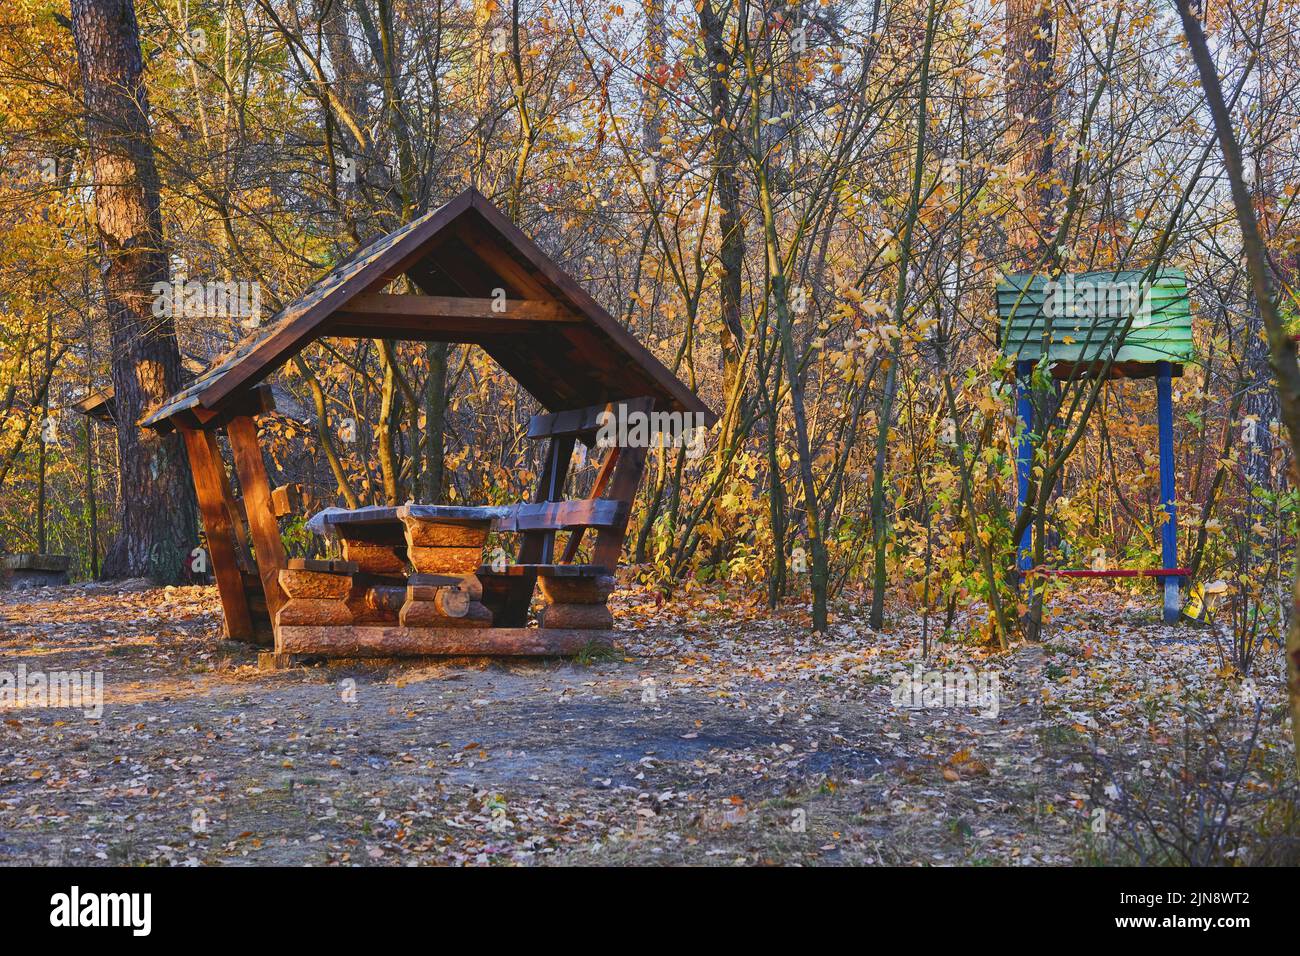 Autumn picnic. Wooden gazebo house in a forest clearing for recreation camping Stock Photo